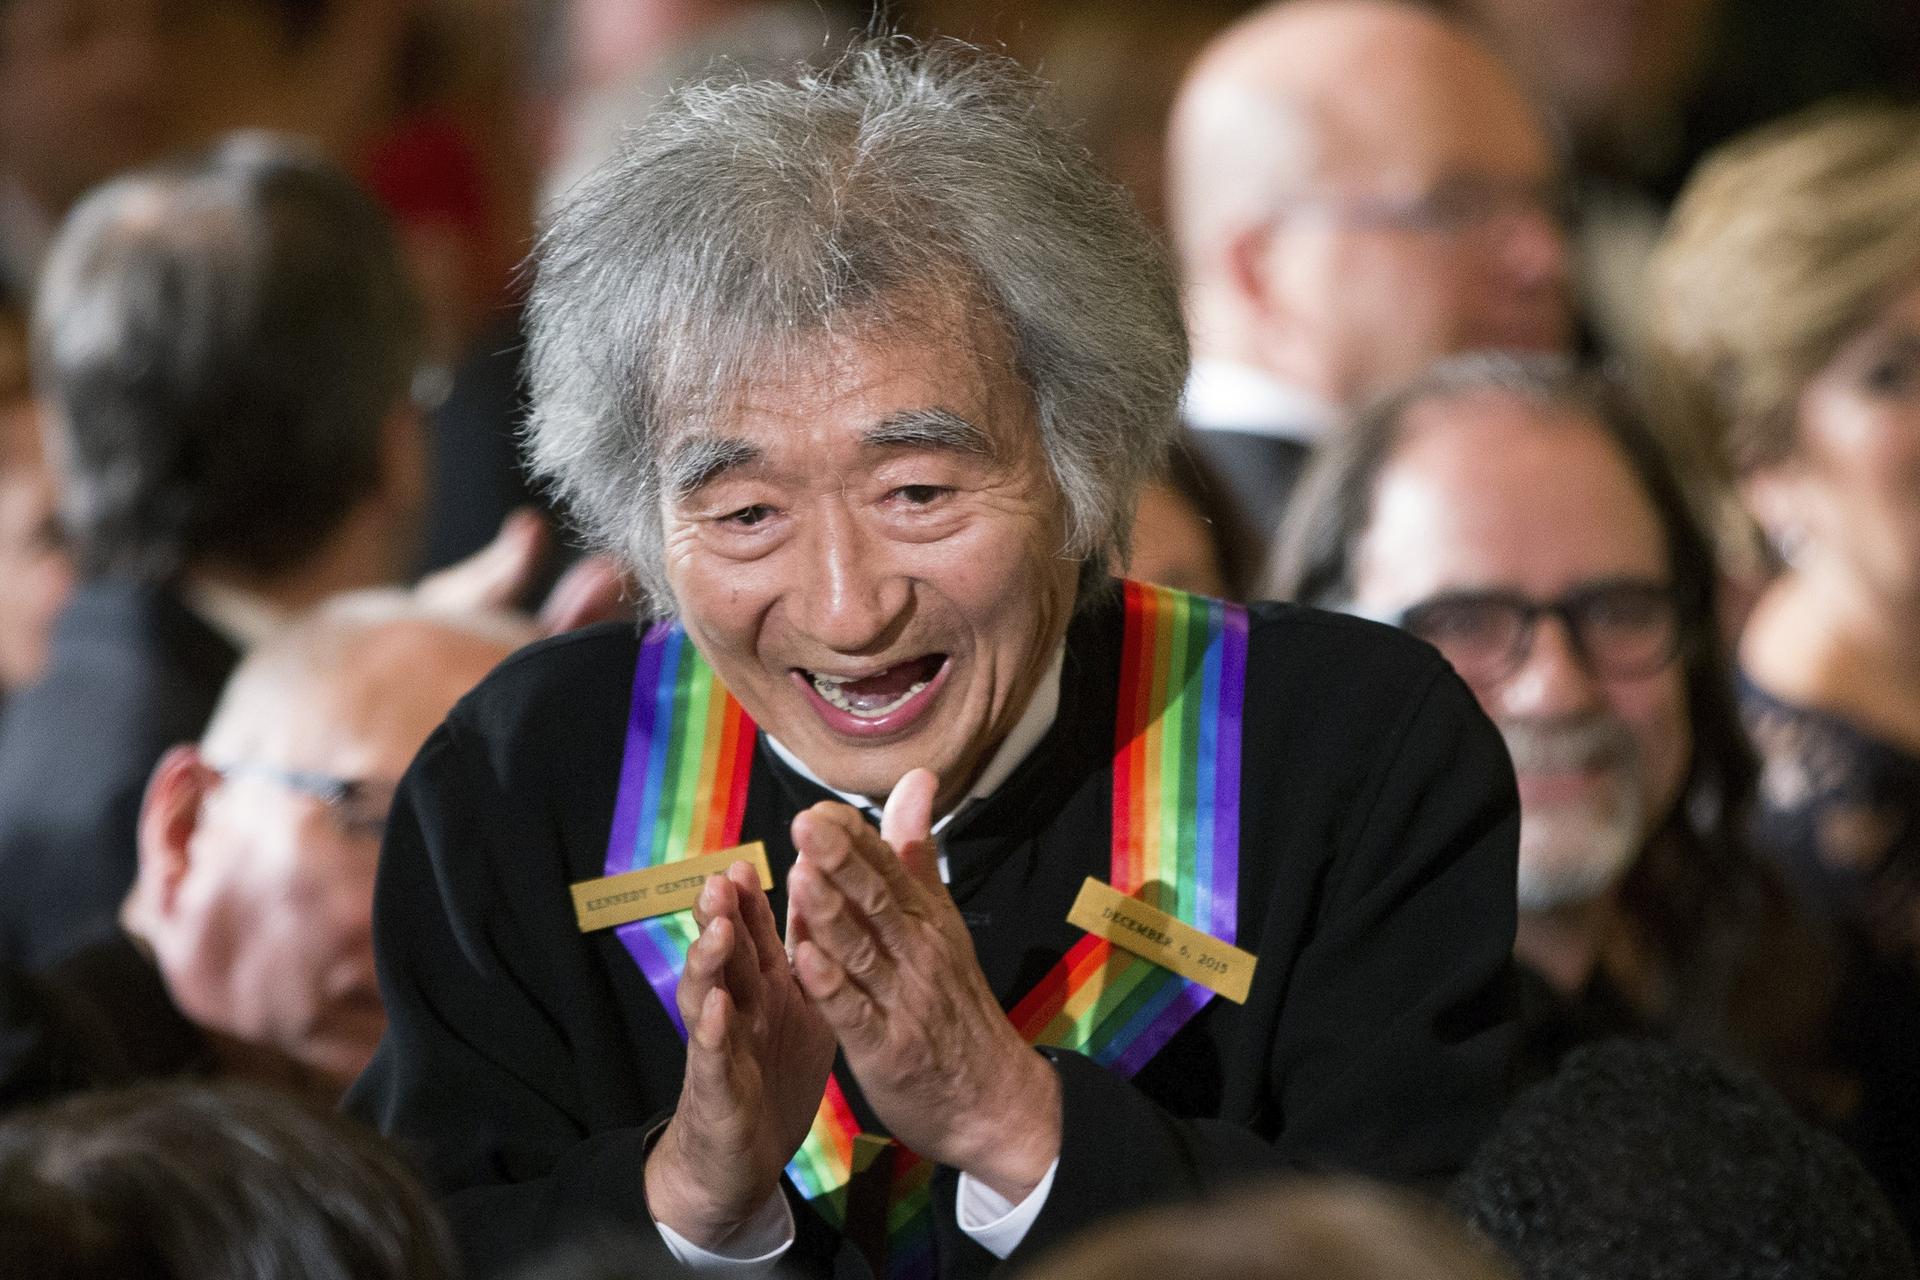 Conductor Seiji Ozawa stops to greet a young child in the audience as he arrives for a reception for himself and the other Kennedy Center Honors honorees in the East Room of the White House in Washington, Dec. 6, 2015.